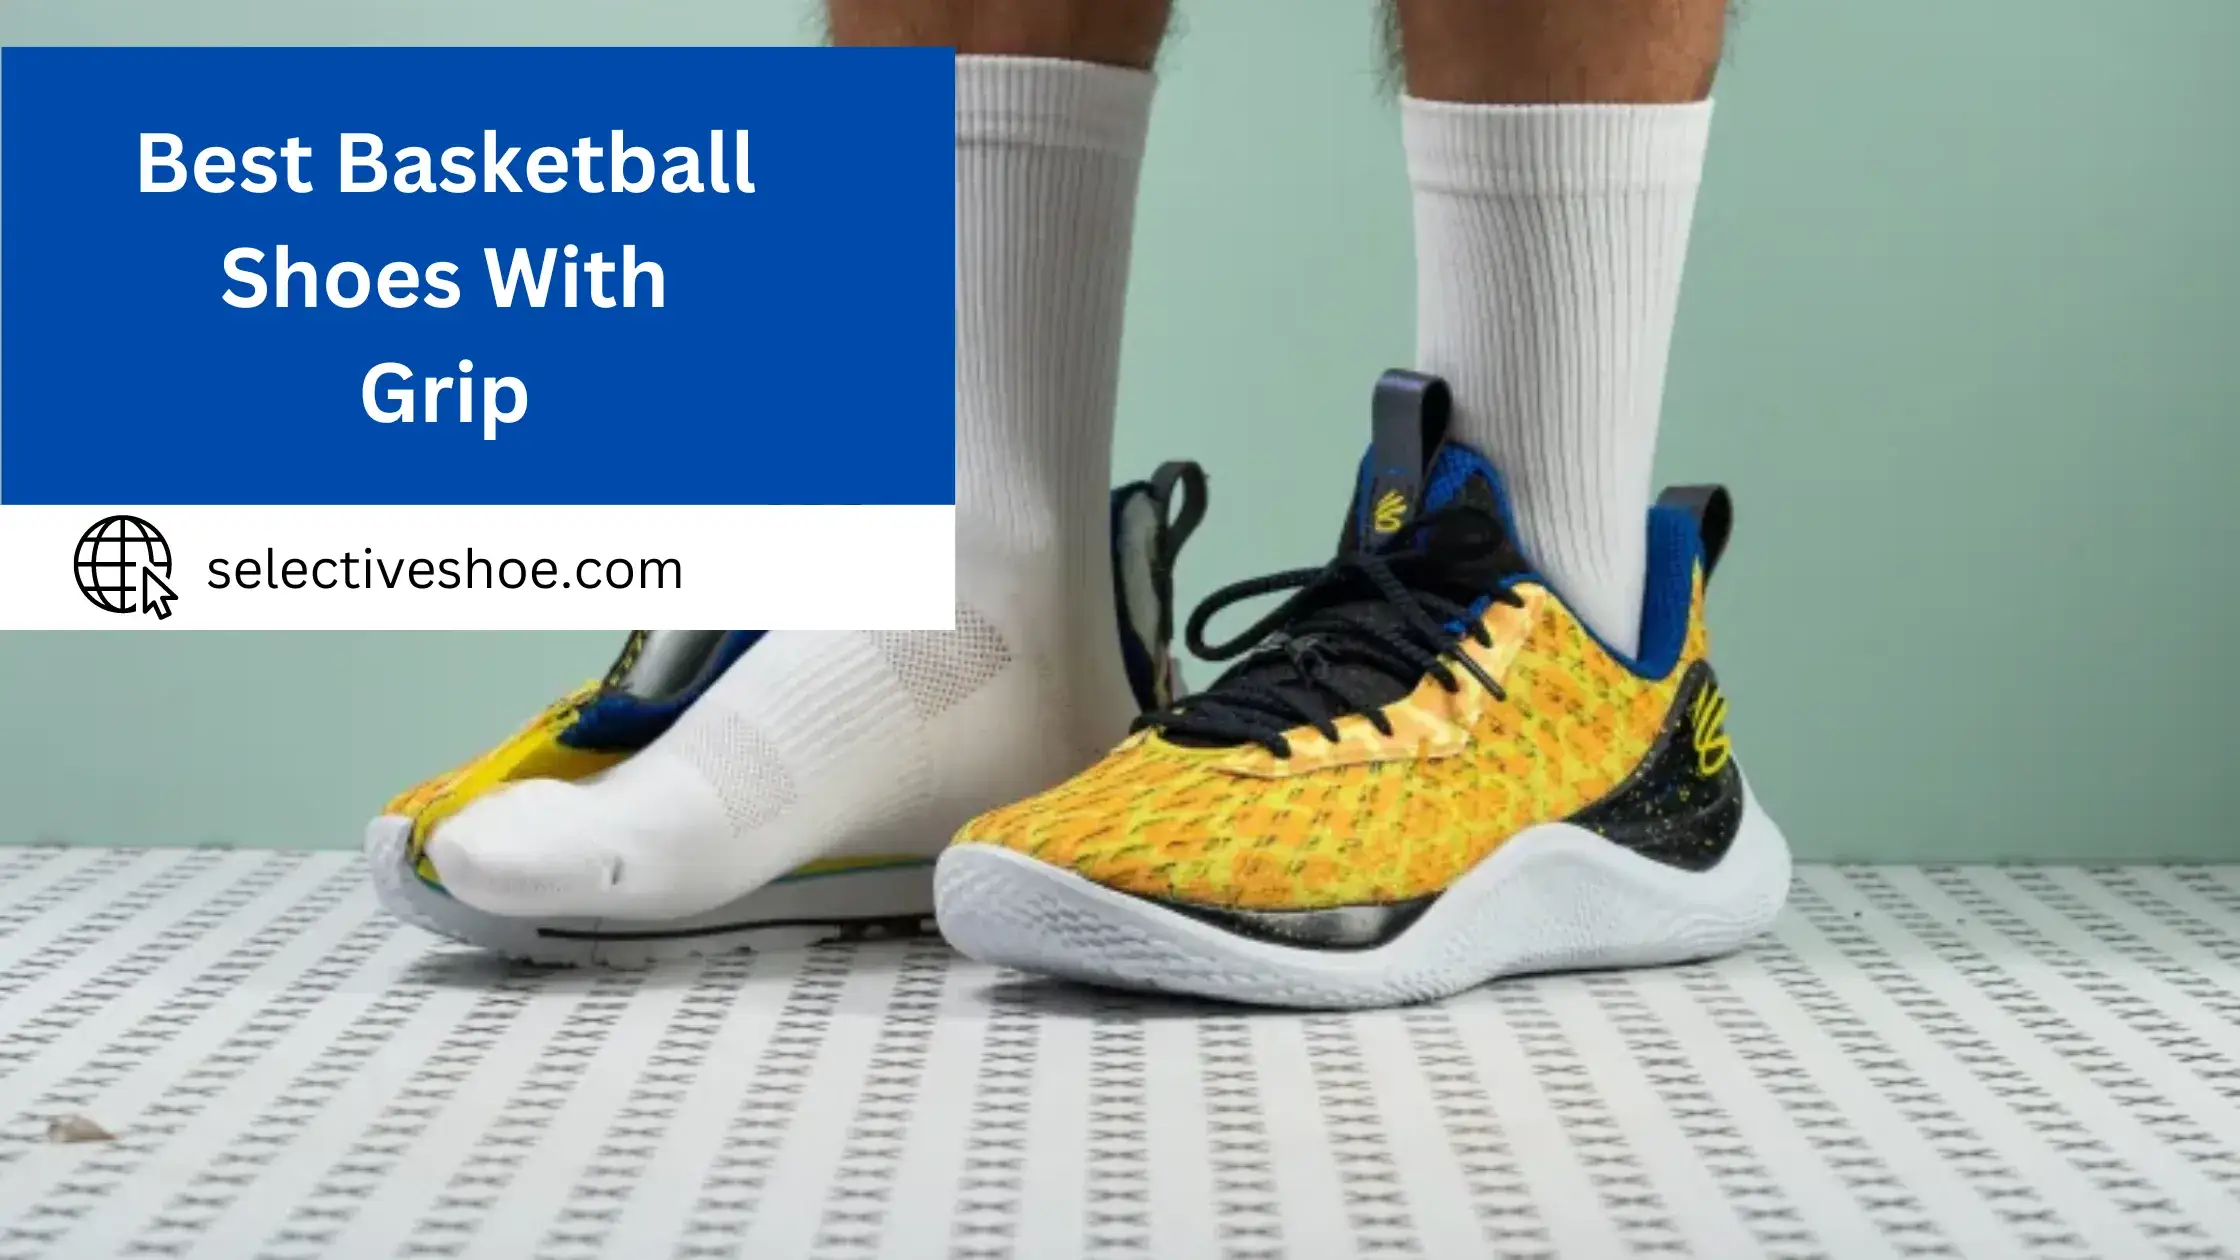 Best Basketball Shoes With Grip - (An In-Depth Guide)